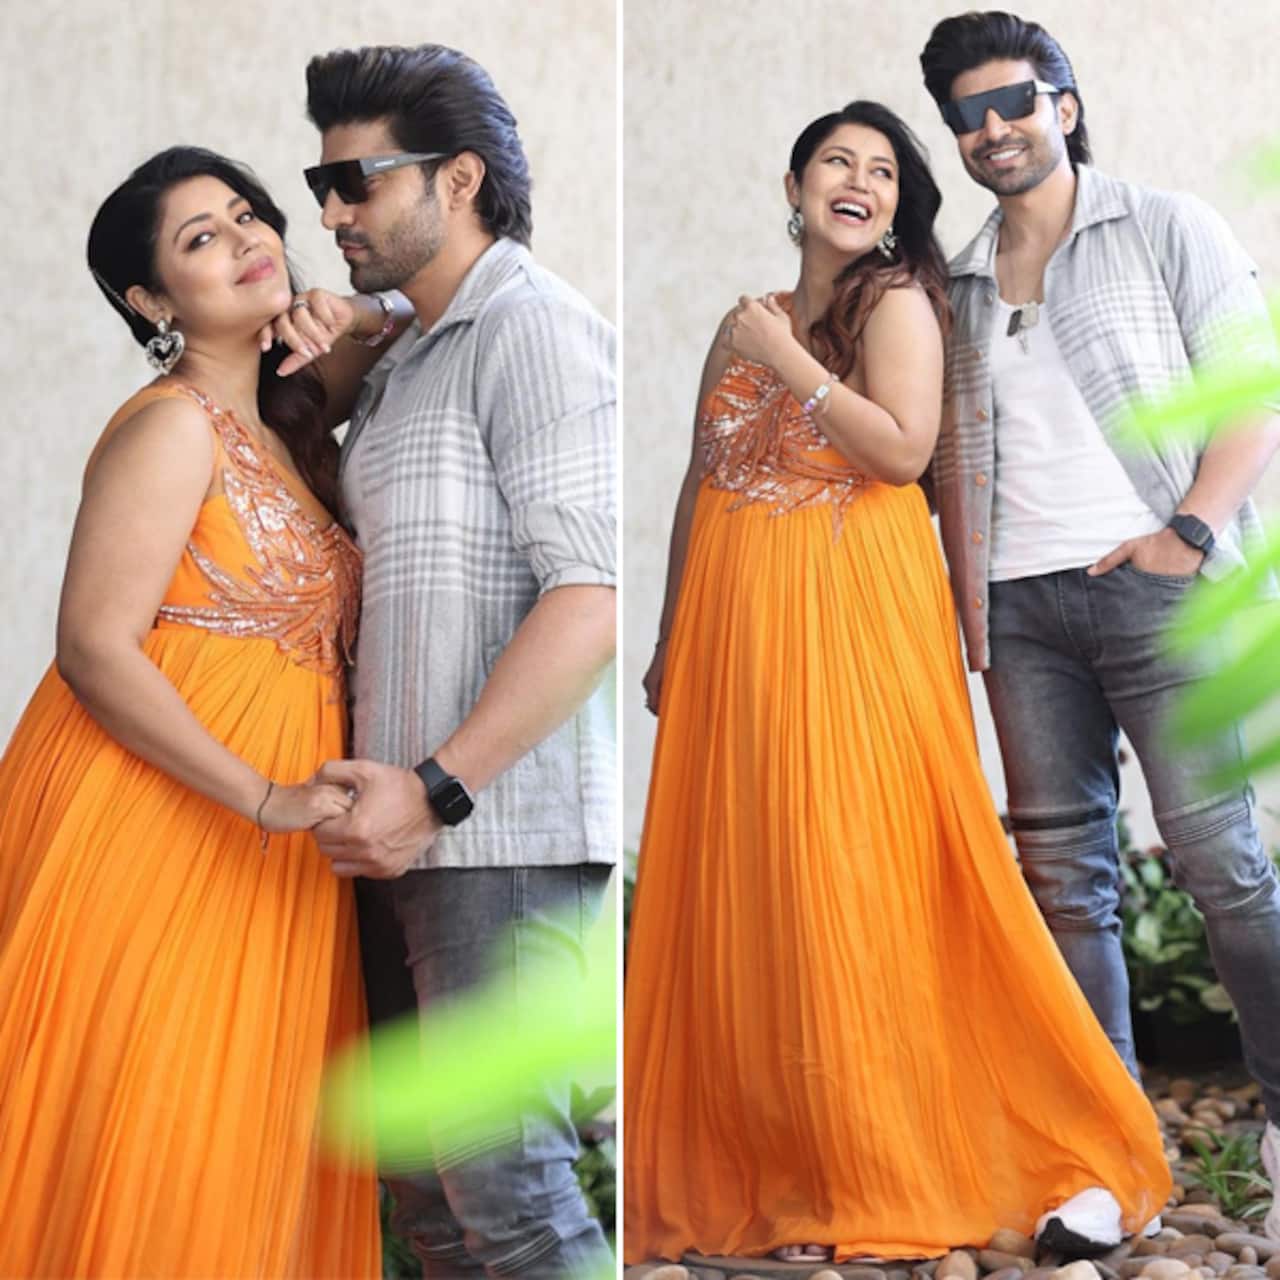 Debina Bonnerjee proudly embraces pregnancy weight gain; stays away from setting 'unrealistic' body goals for new mommies [View Pics]